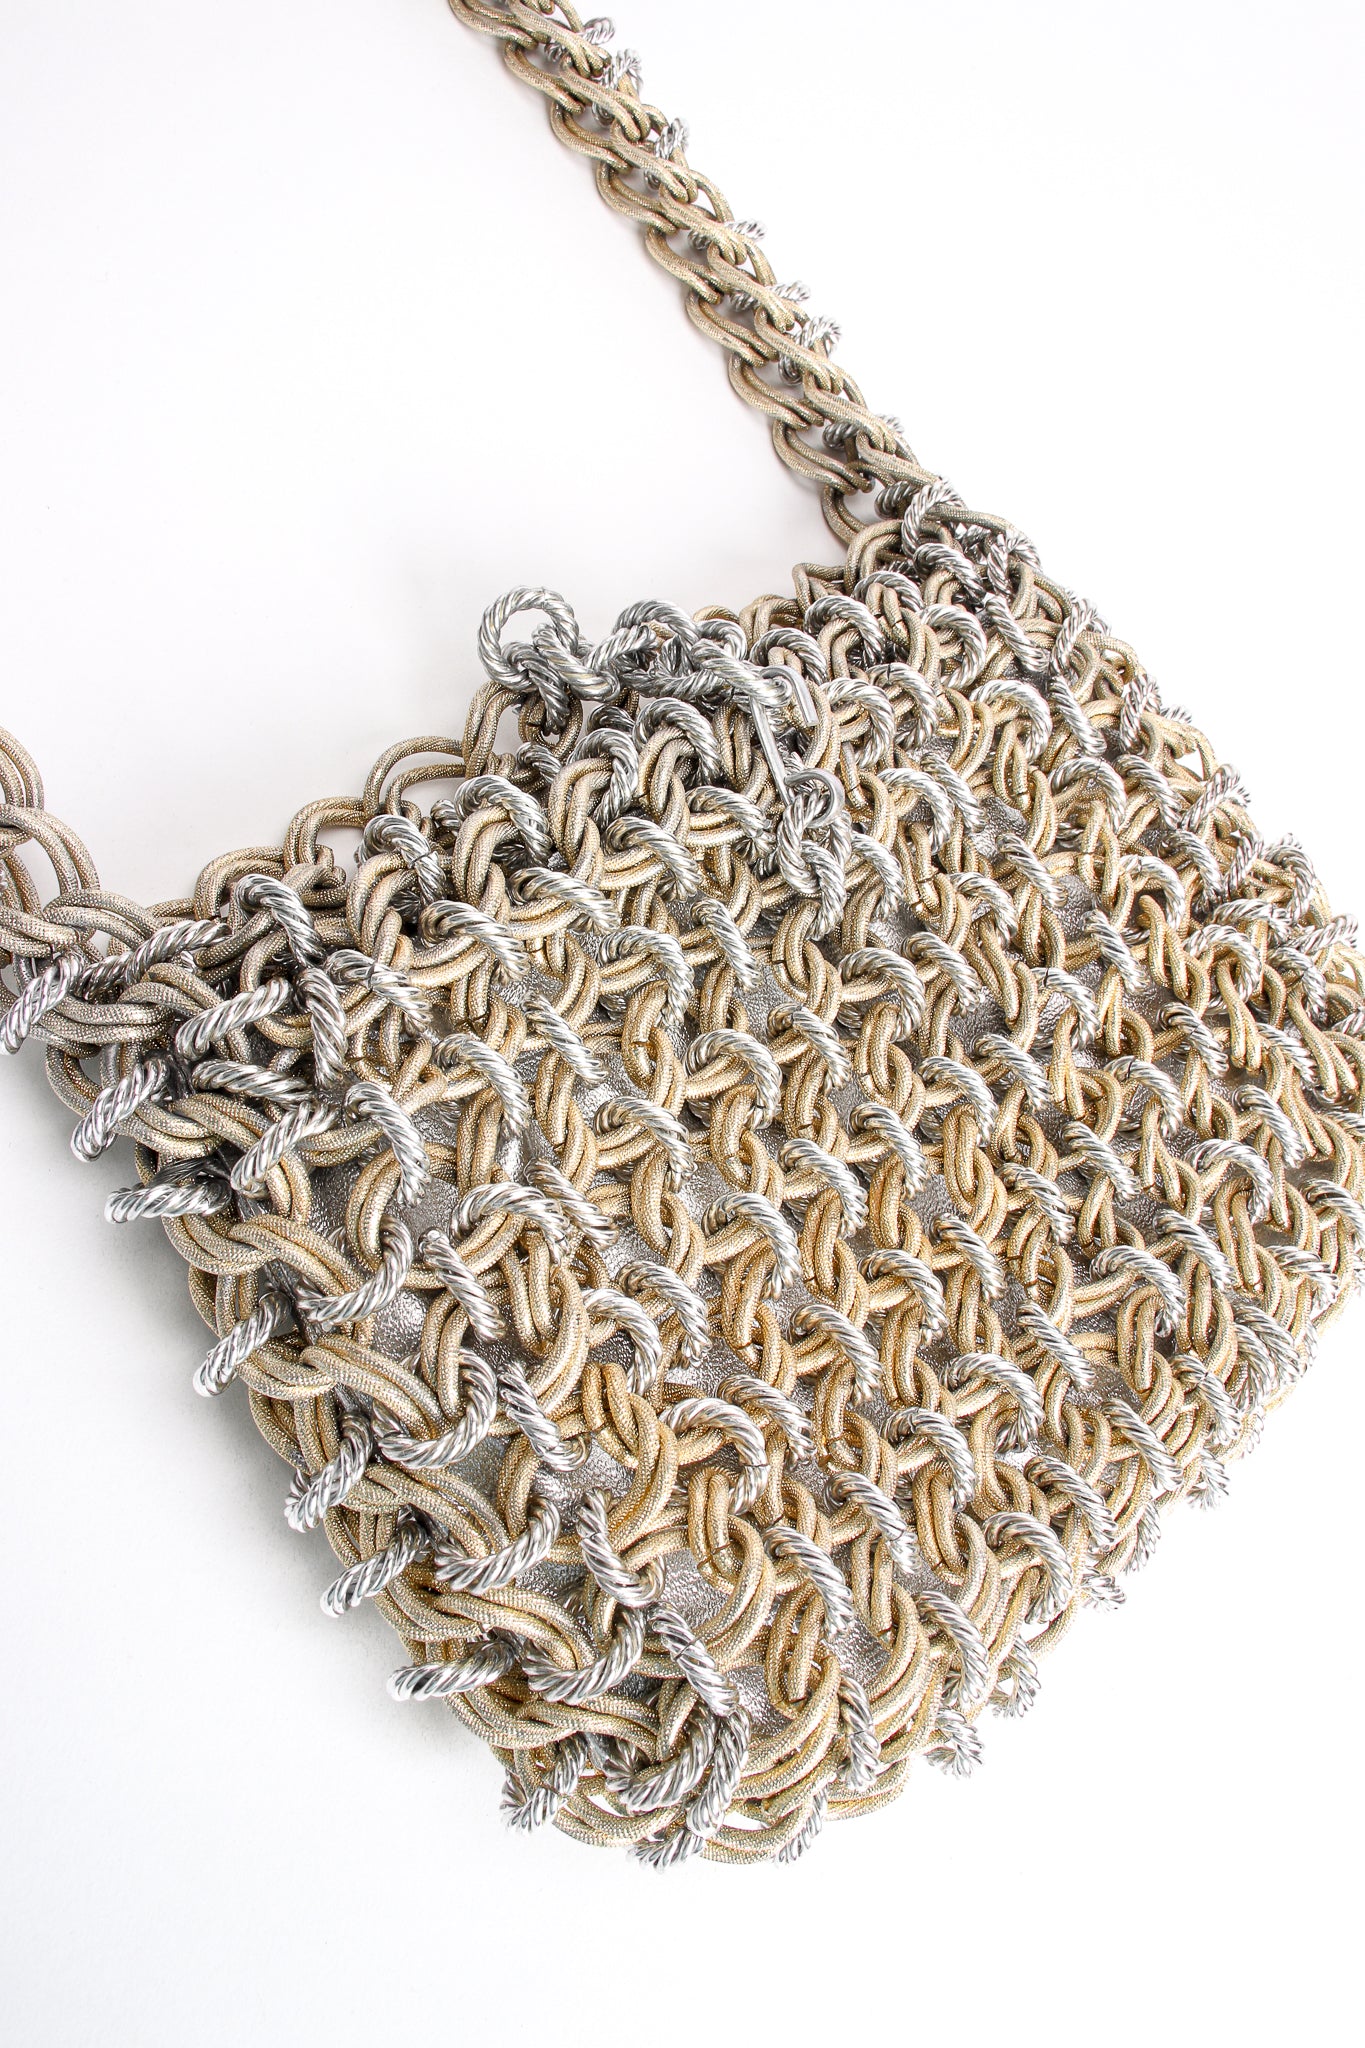 Vintage Raoul Calabro Two Tone Chain Mail Bag Set detail at Recess Los Angeles